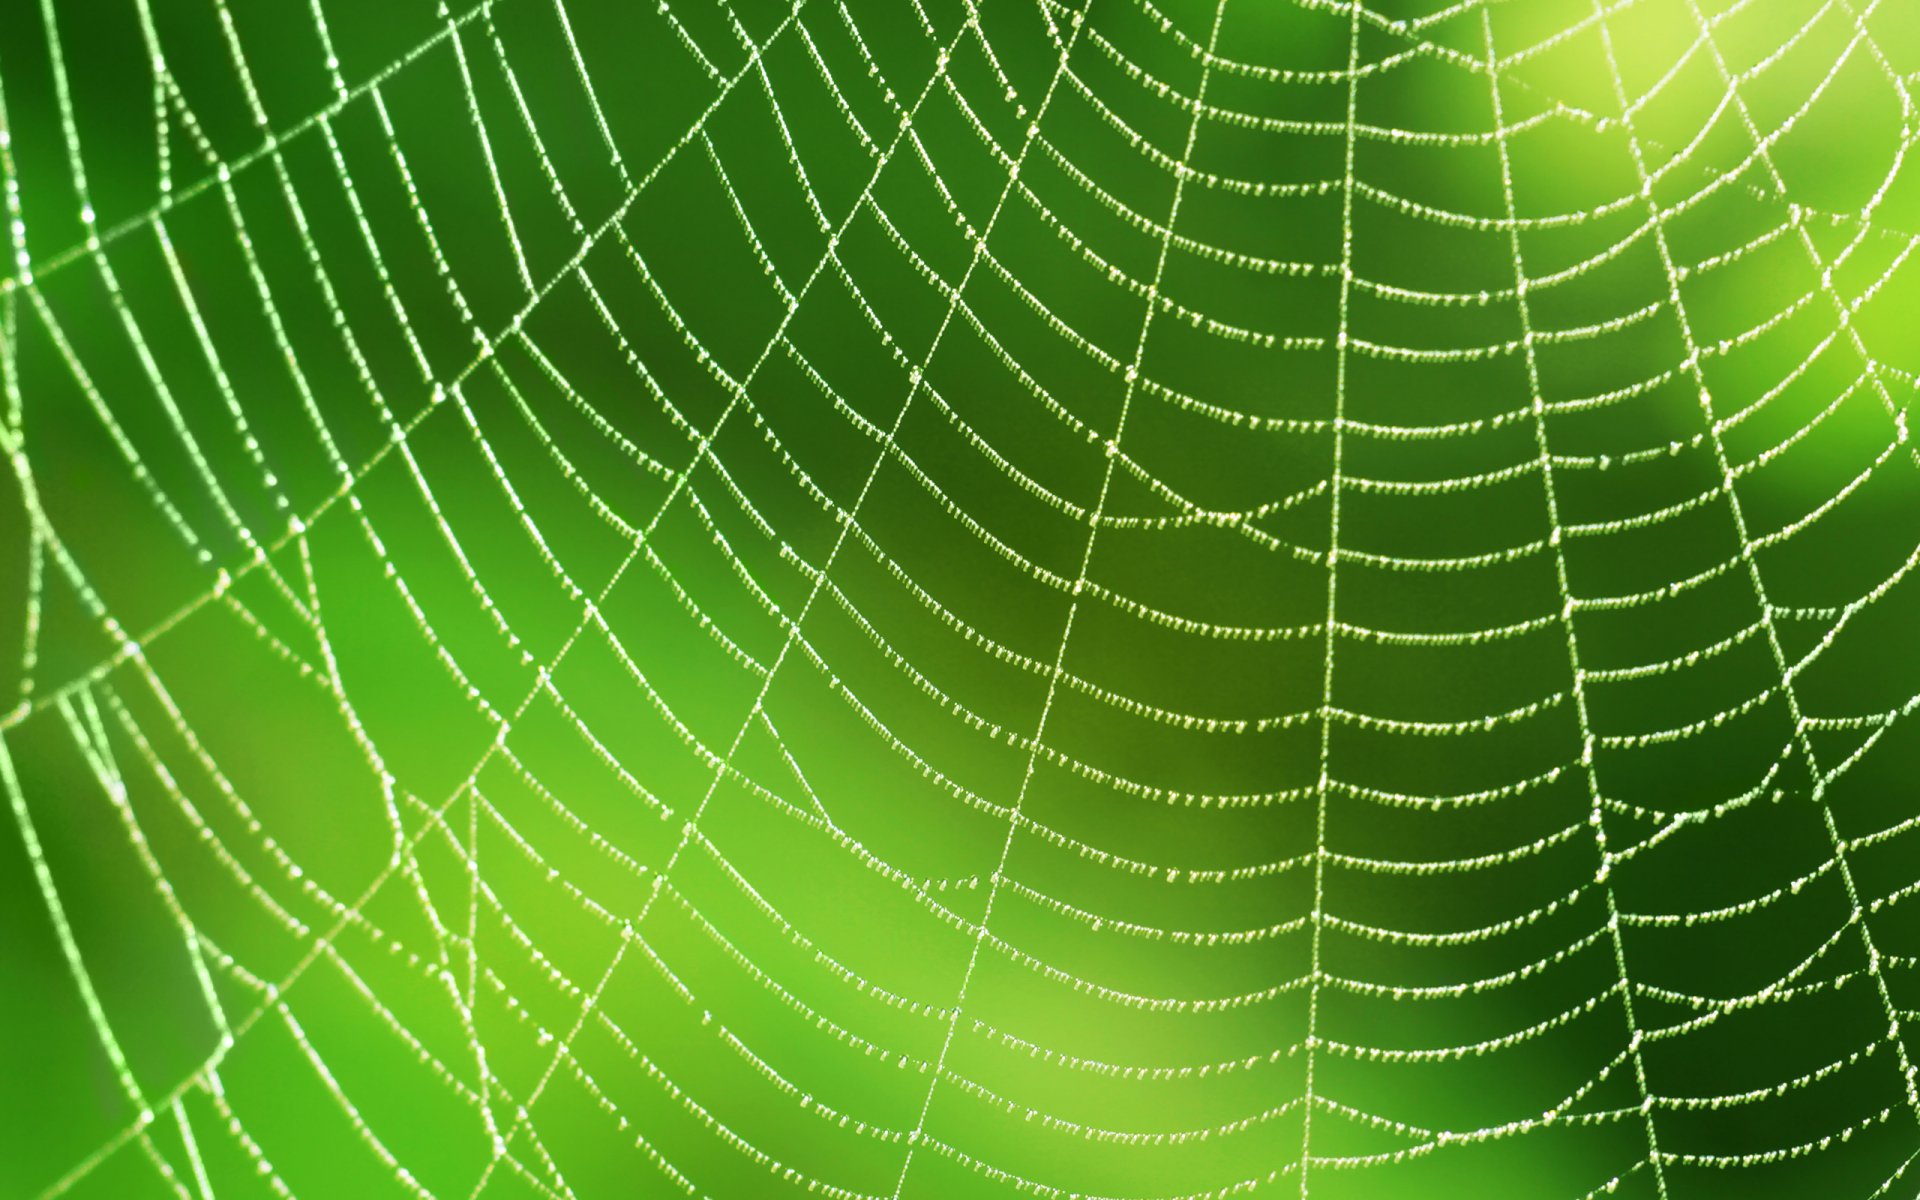 spider in a web wallpaper